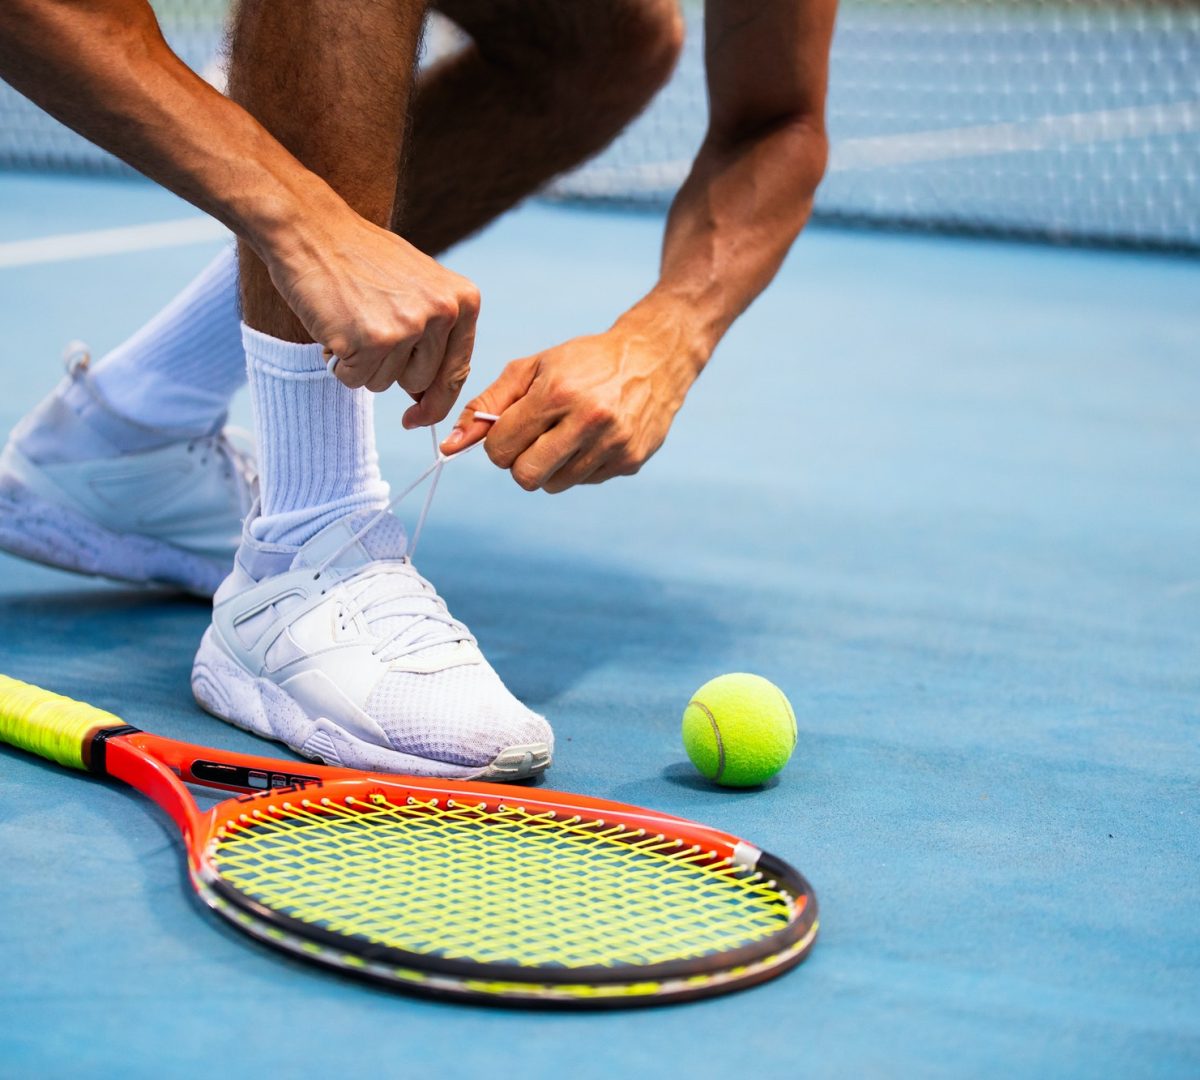 Tennis athlete player getting ready tying shoe laces during game on outdoor